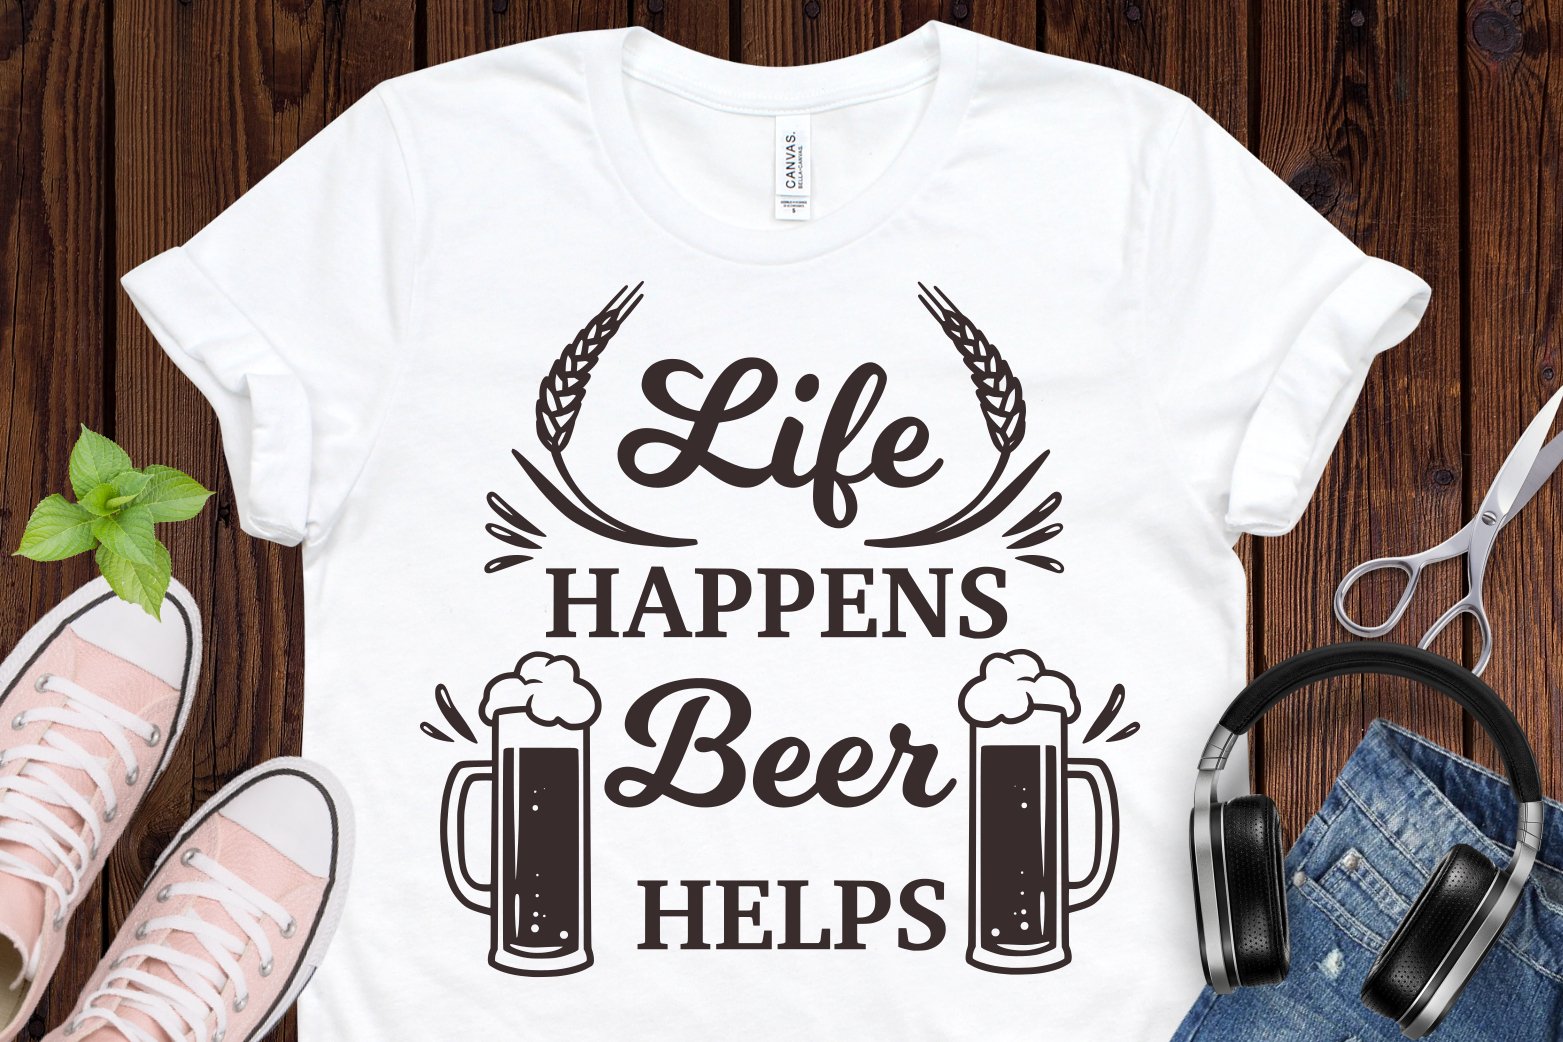 Beer phrase on the white t-shirt.